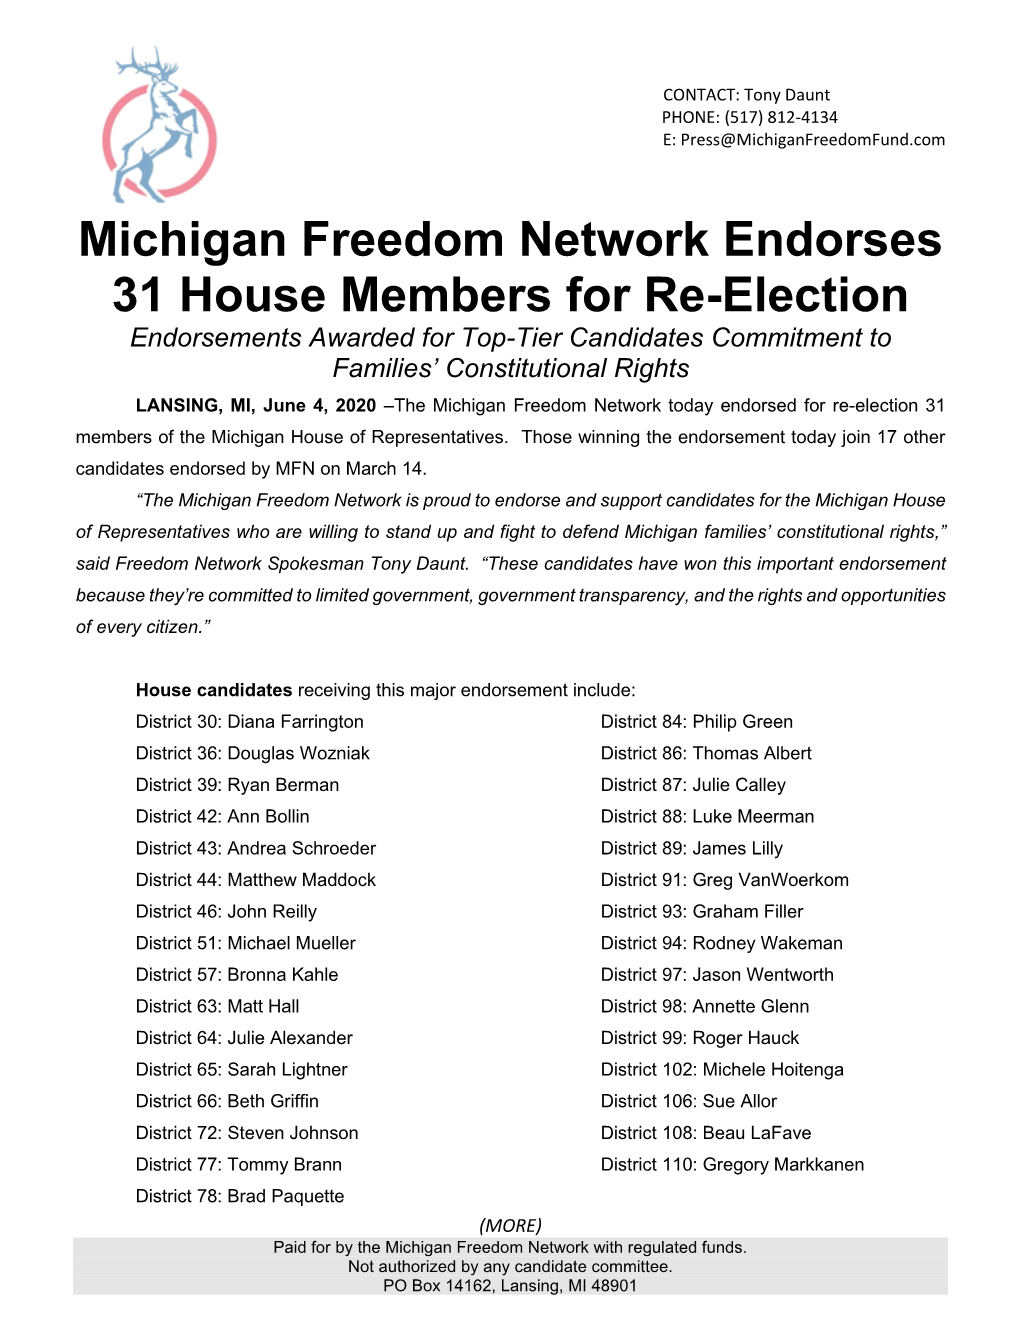 Michigan Freedom Network Endorses 31 House Members for Re-Election Endorsements Awarded for Top-Tier Candidates Commitment to Families’ Constitutional Rights